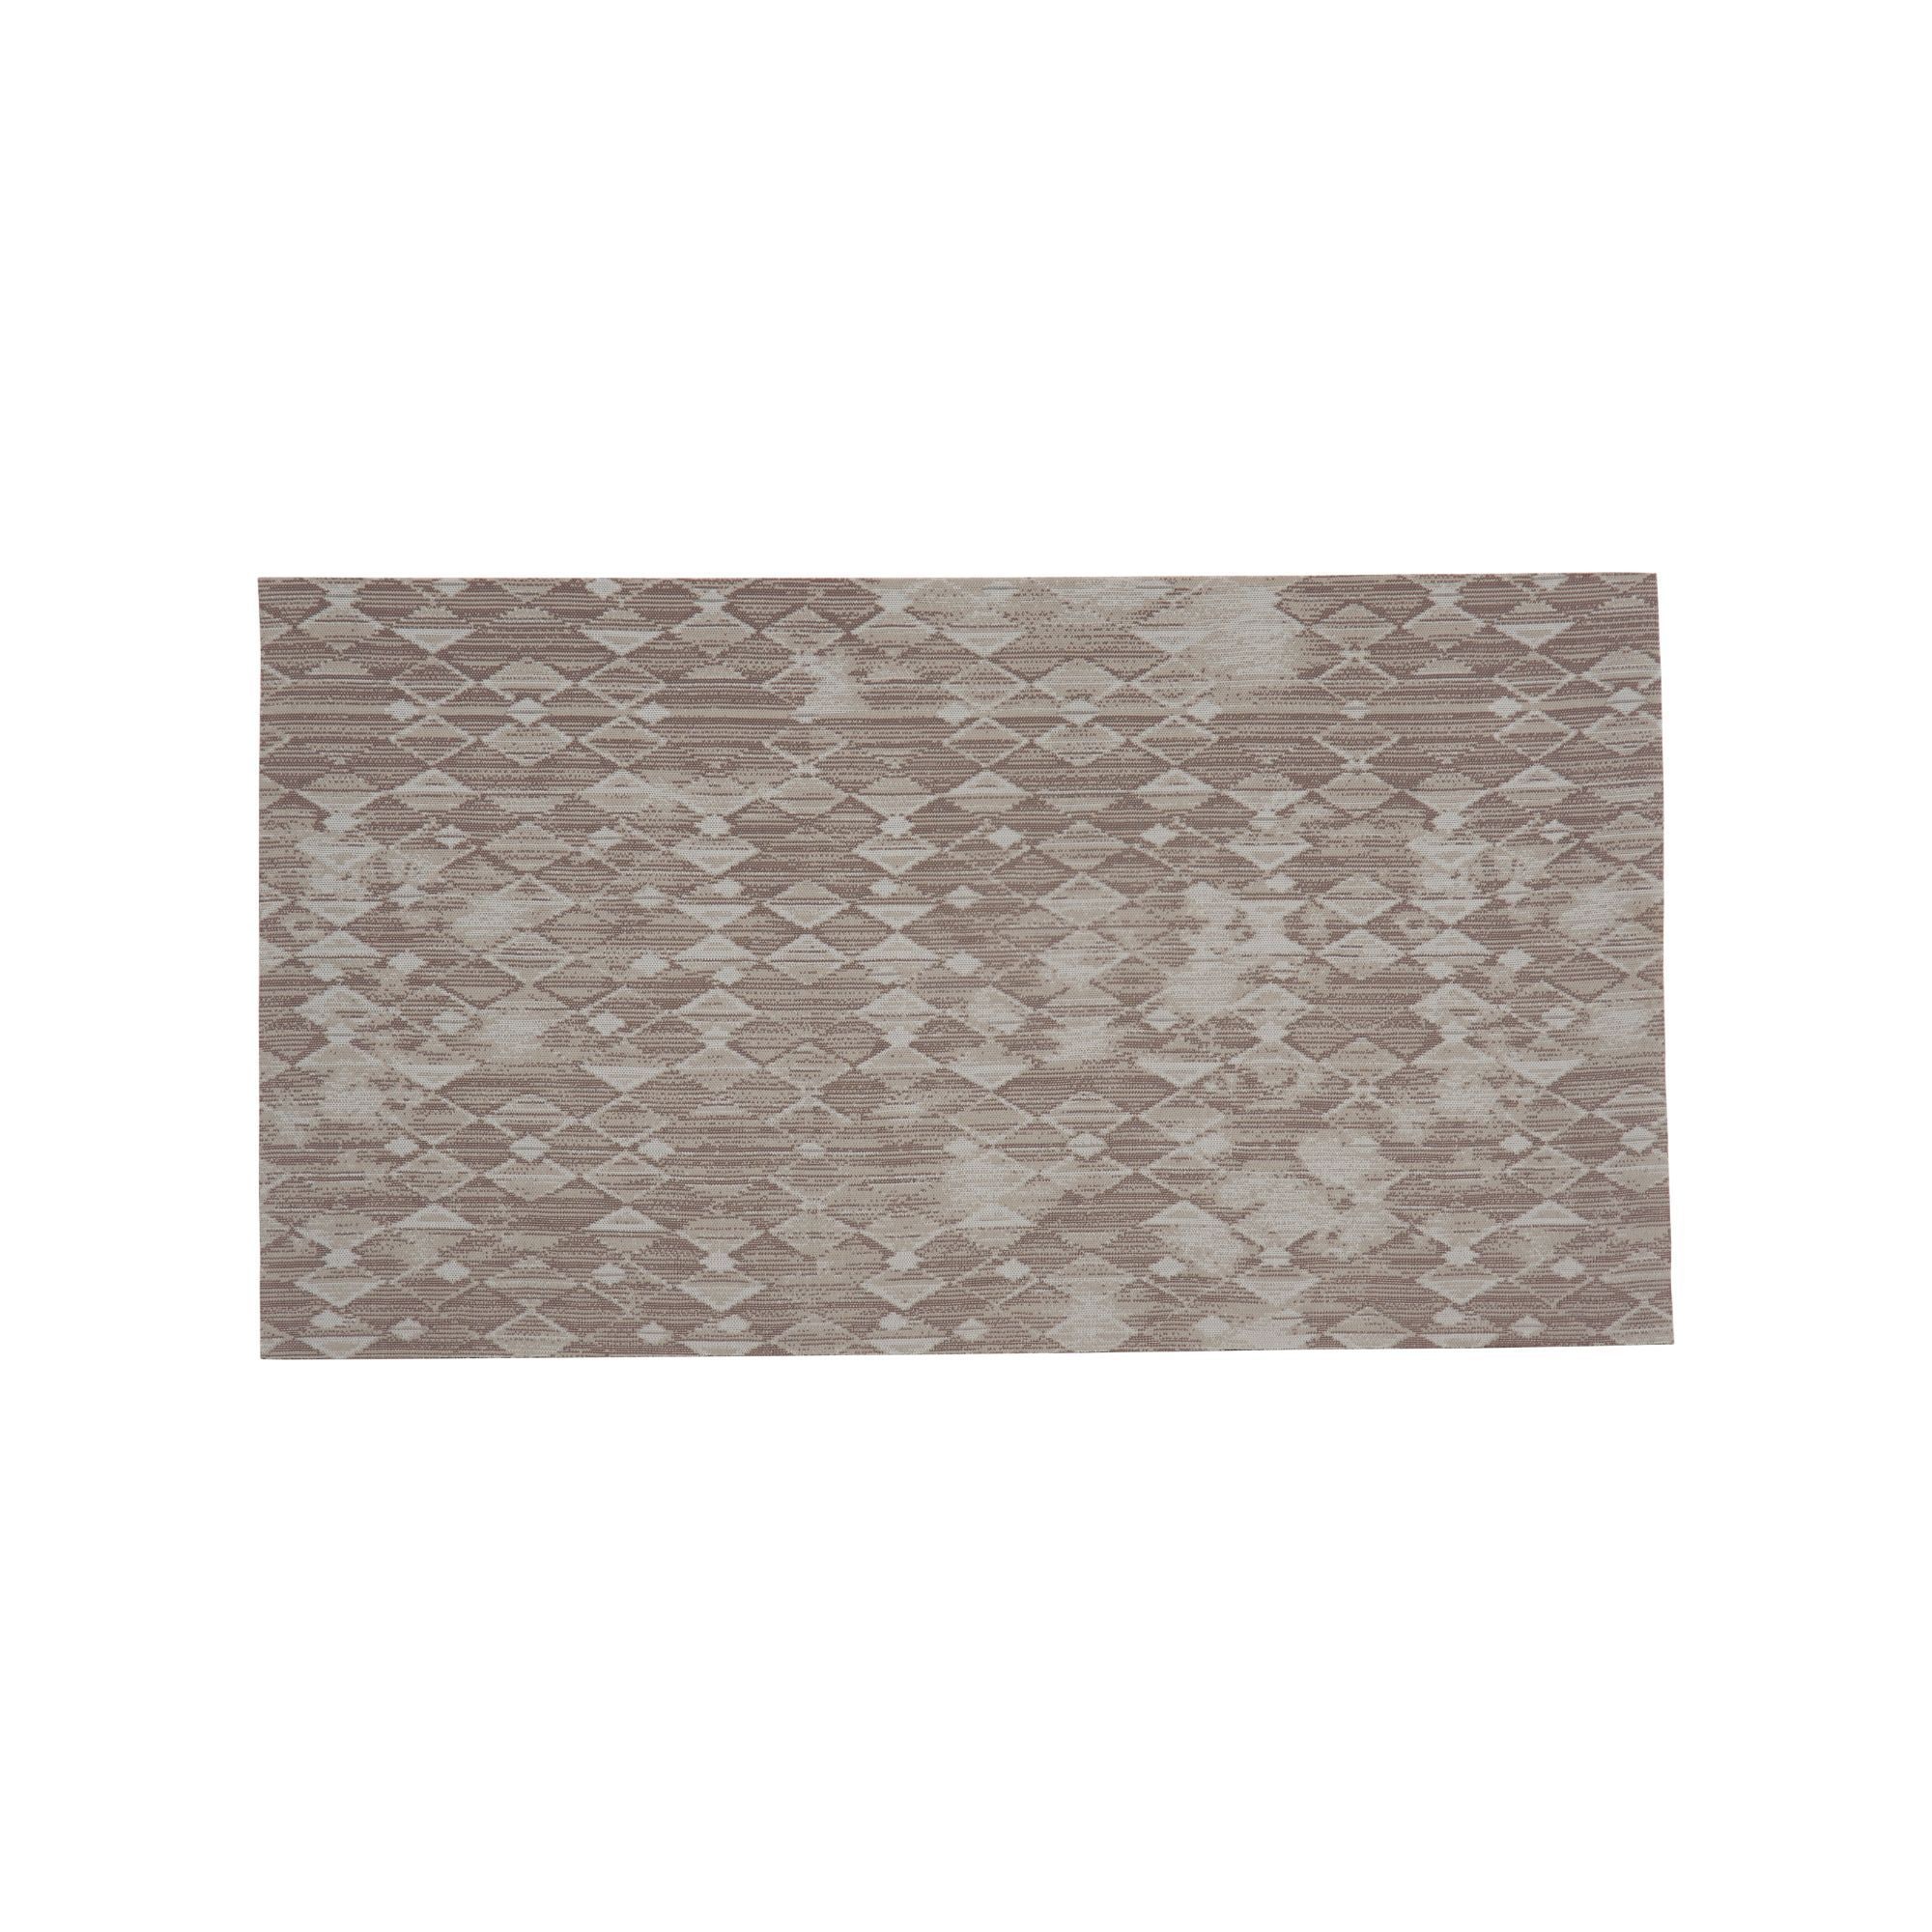 Better Trends Trier 2pc Set Bath Rug 20-in x 30-in Grey Cotton